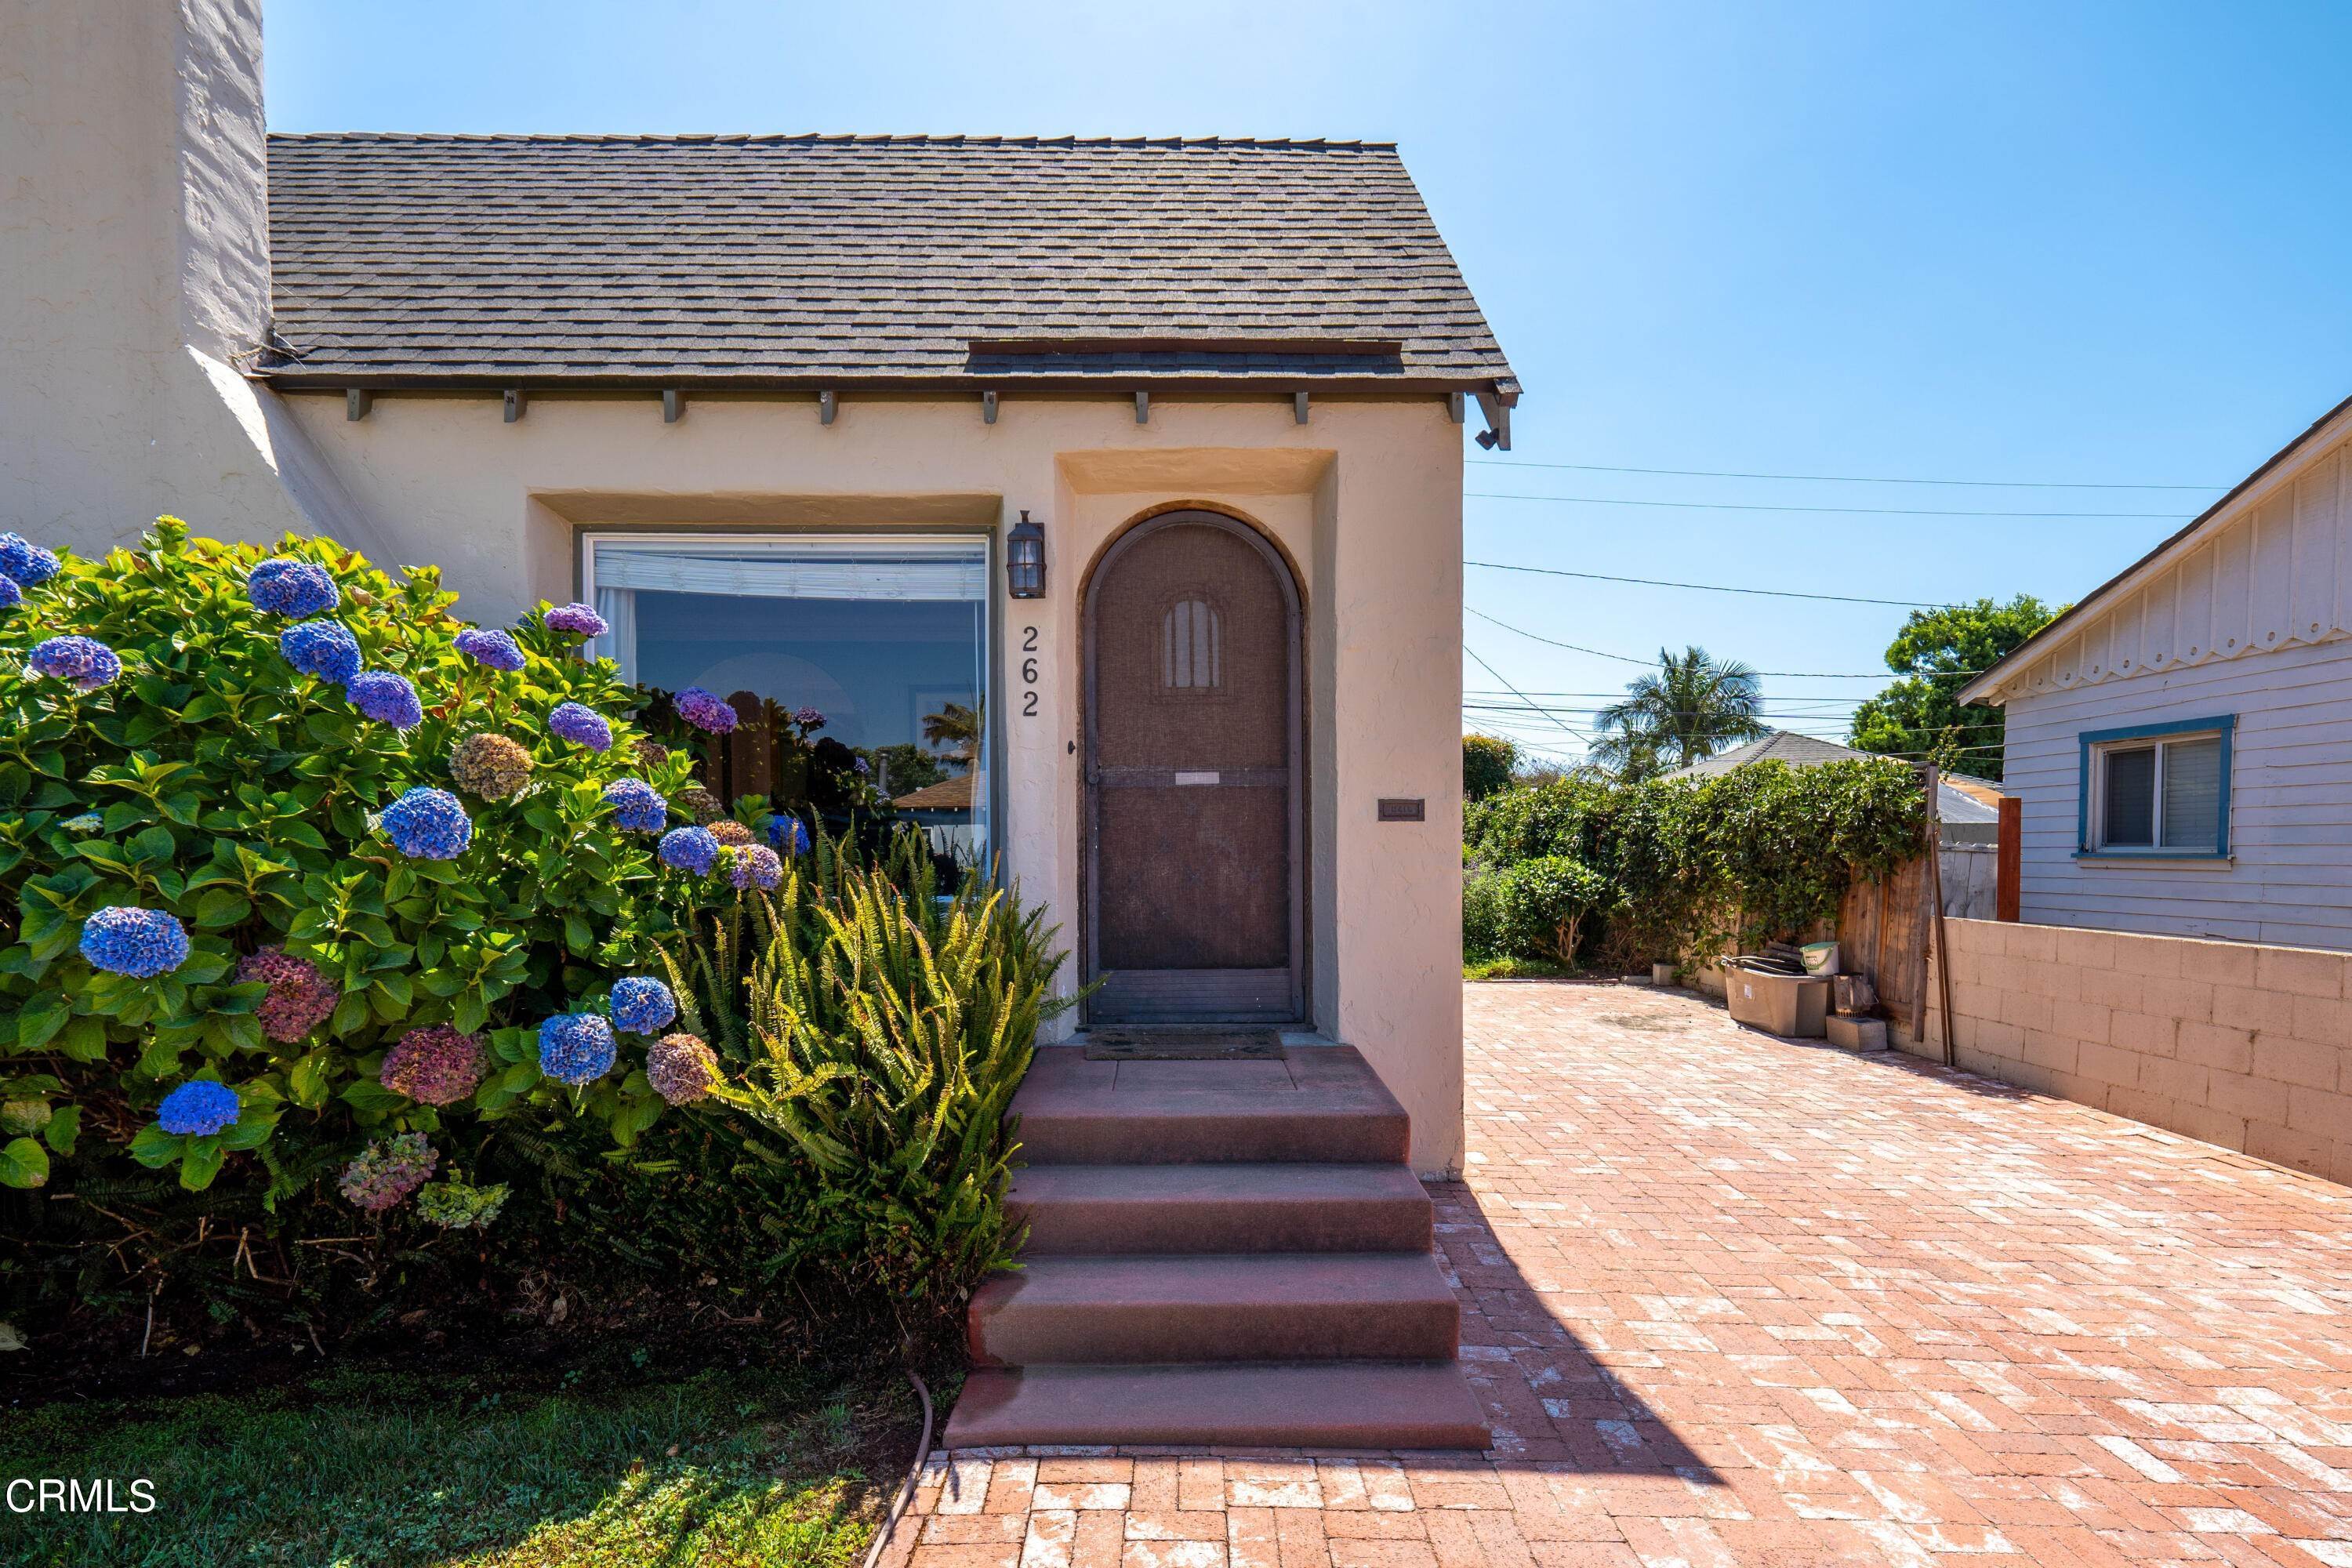 2. Single Family Homes for Sale at 262 East Vince Street Ventura, California 93001 United States